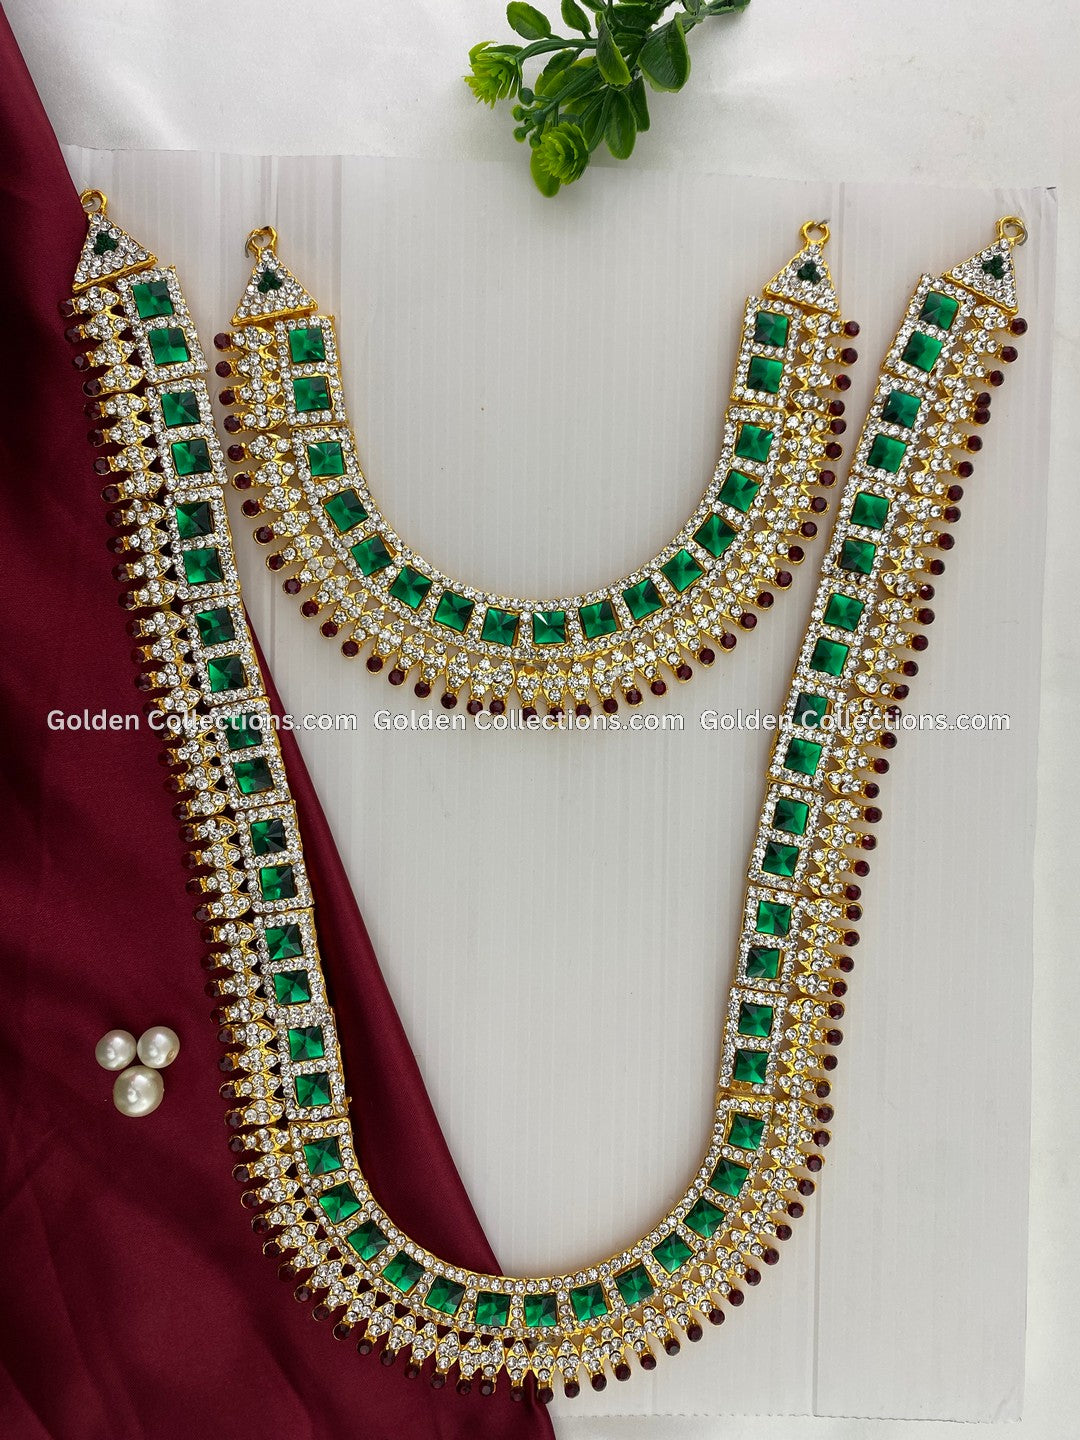 Authentic Hindu God Jewellery-GoldenCollections